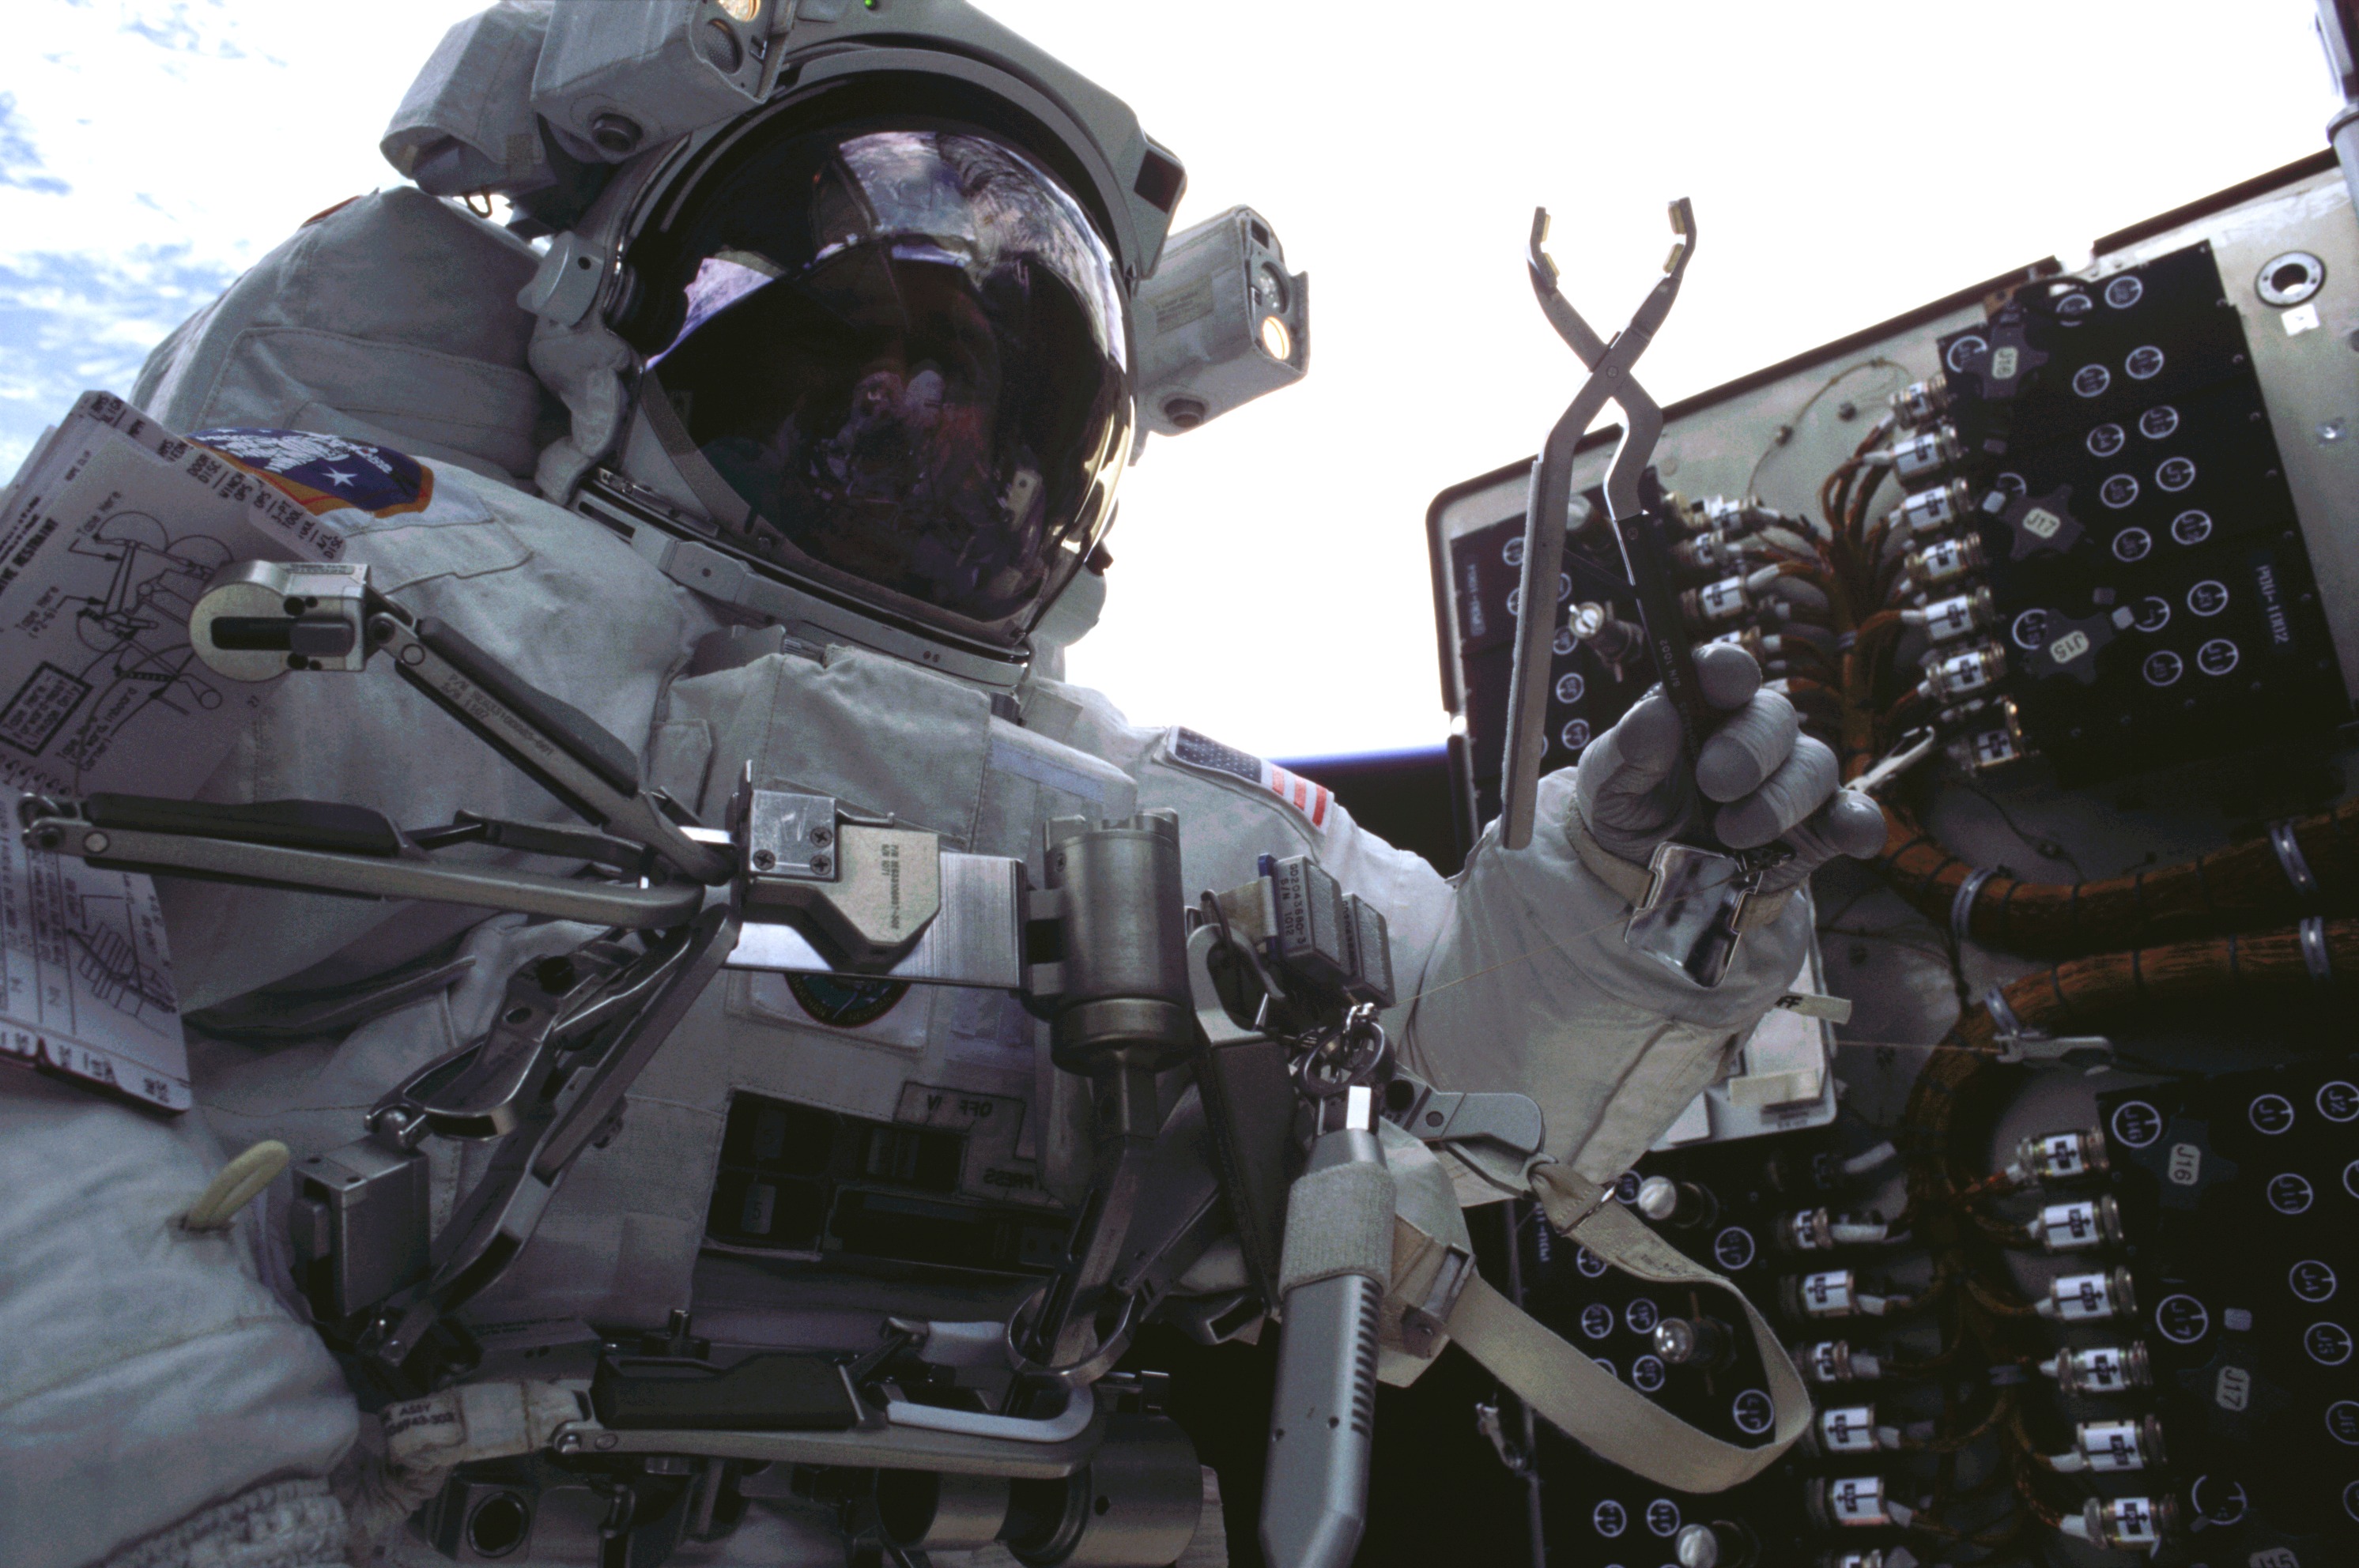 An astronaut in a spacesuit holds aloft a tool resembling a pair of pliers in front of a device covered with wires and connectors. Earth is visible in the background.